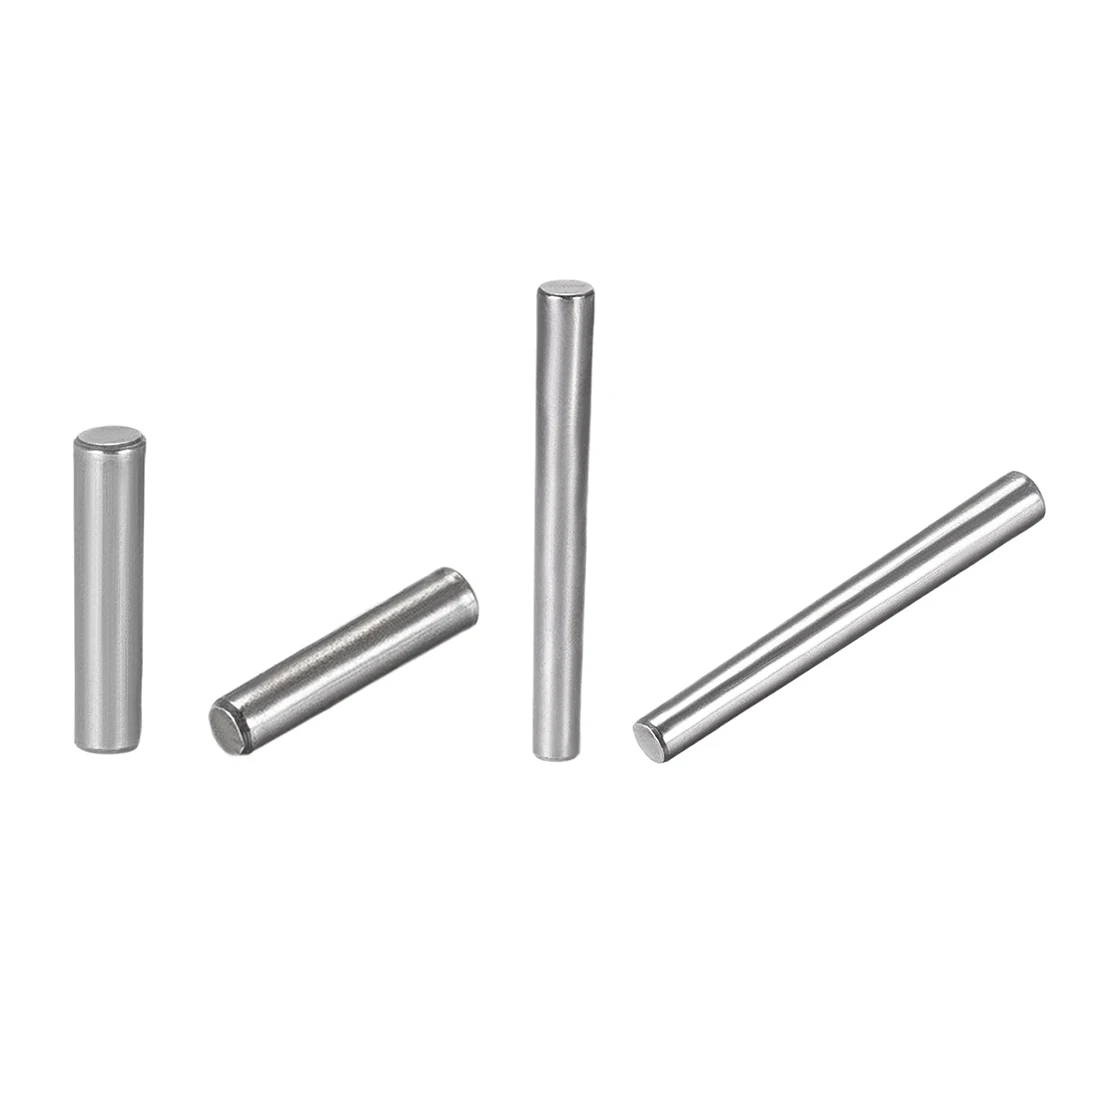 Cylindrical Pin Dowel Positioning Pin10/20/50pc A2 M3 M4 Stainless Steel 304